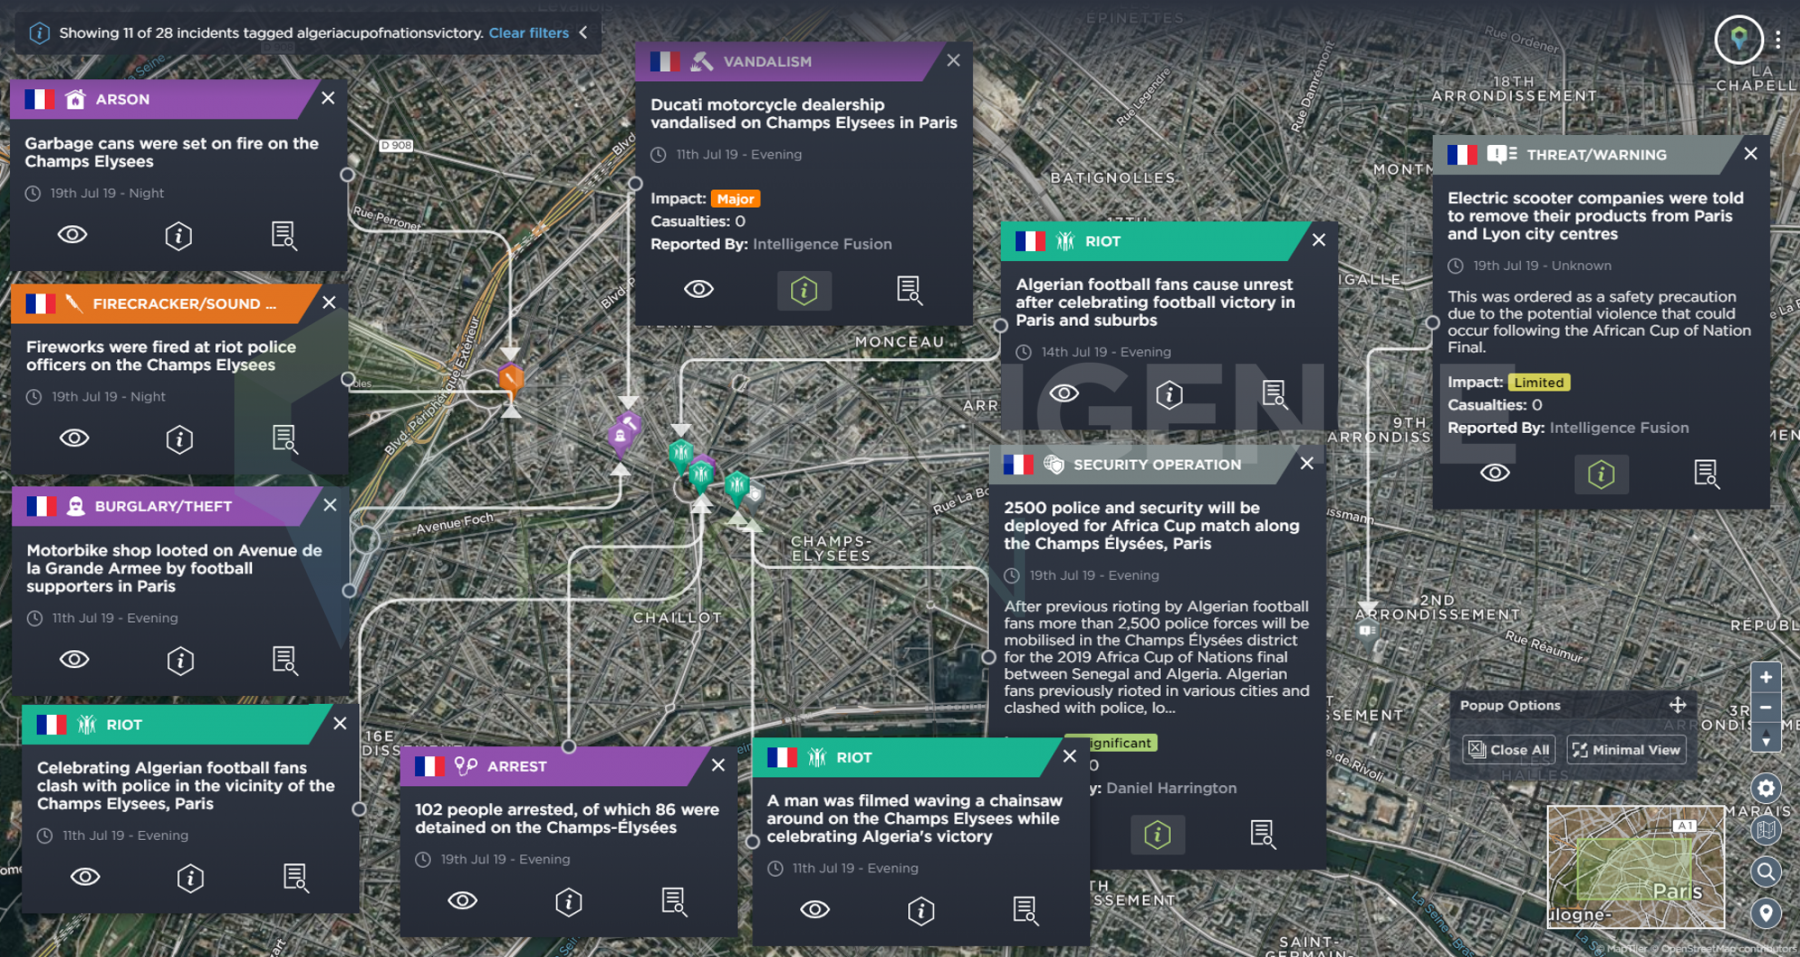 A map of the incidents along Champ Elysee in Paris during the African Cup of Nations tournament